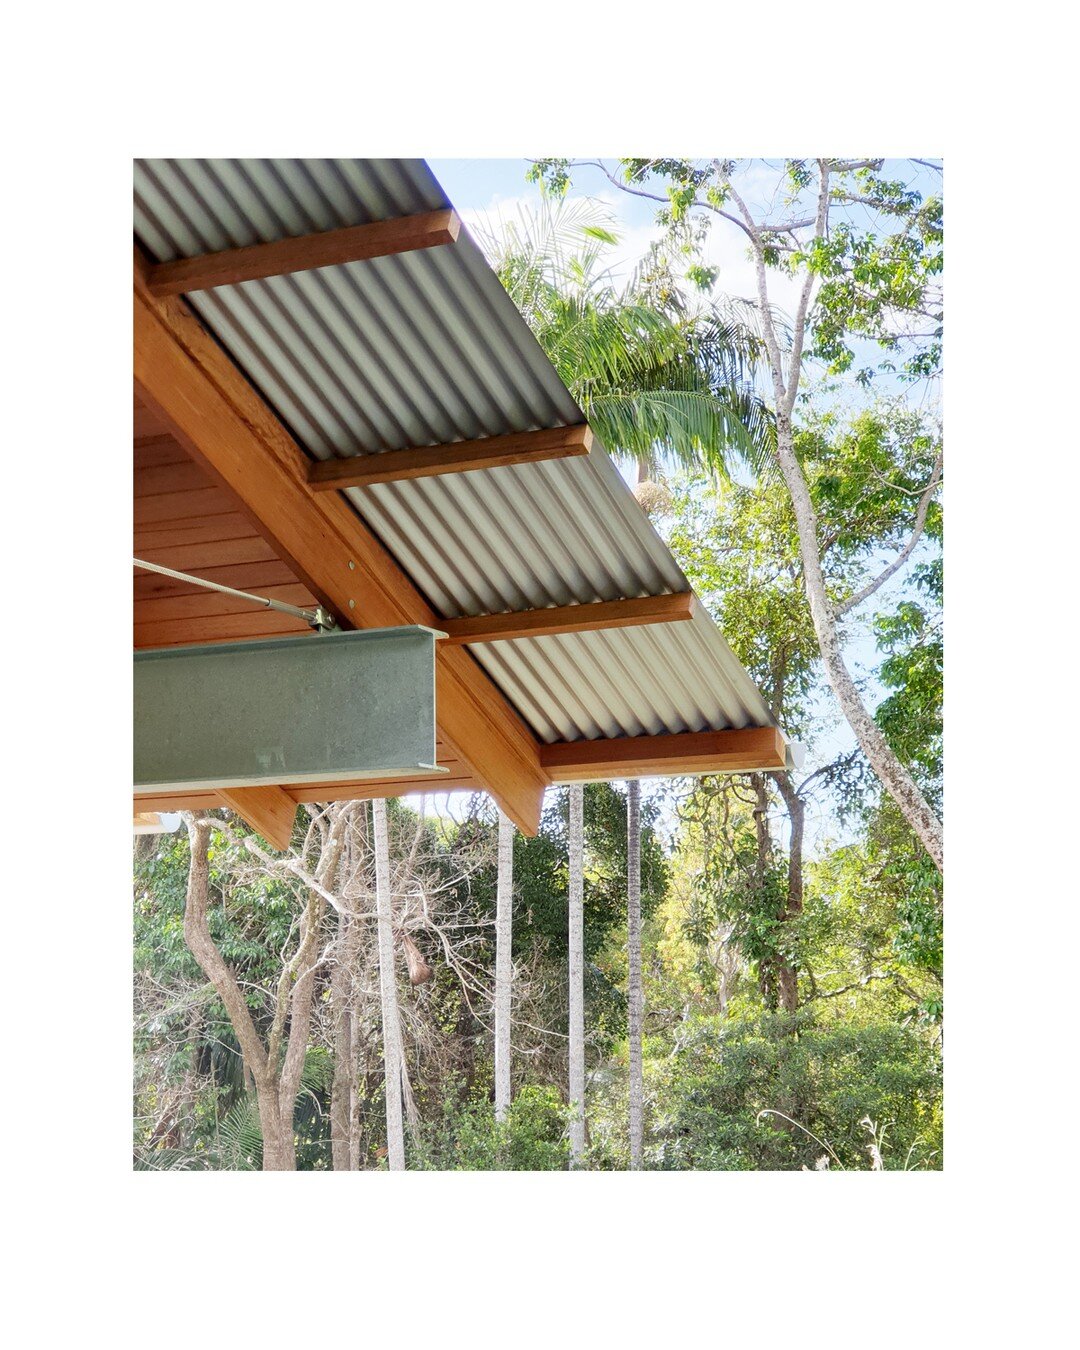 Cantilevered canopy cover in Byron Bay #CCCBB. WIP from our #amenityblock conversion, transforming a concrete block building into an expanded sheltering space.

#warearchitects #northcoast #regionalist #roofstructure #byronbayarchitect #architecturea